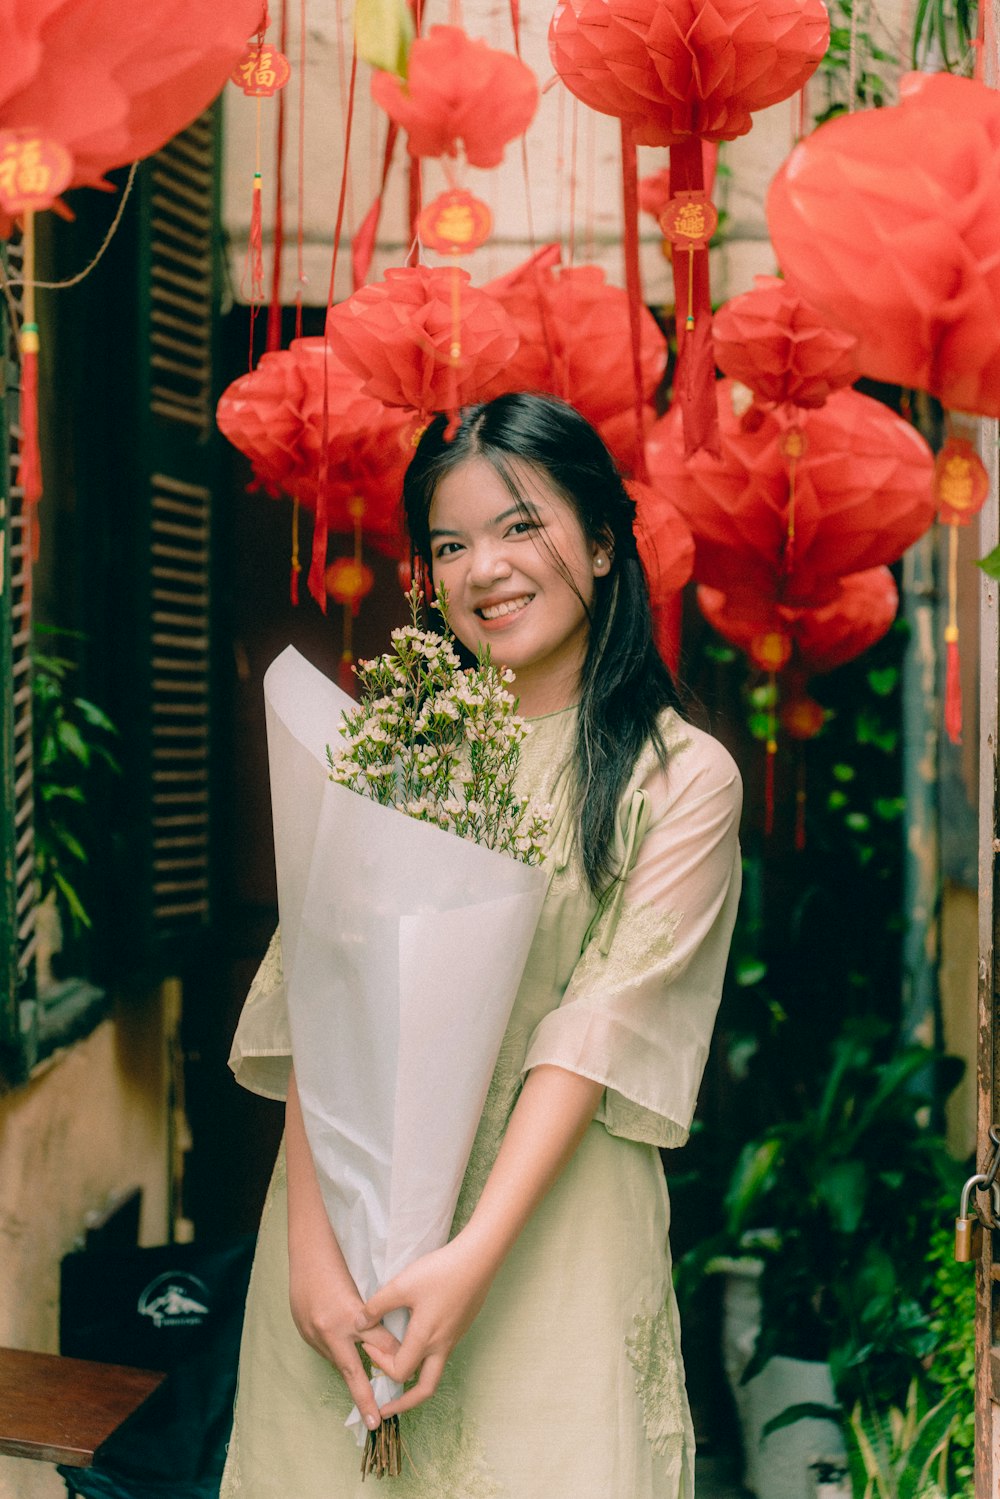 a woman holding a bouquet of flowers in front of red paper lanterns